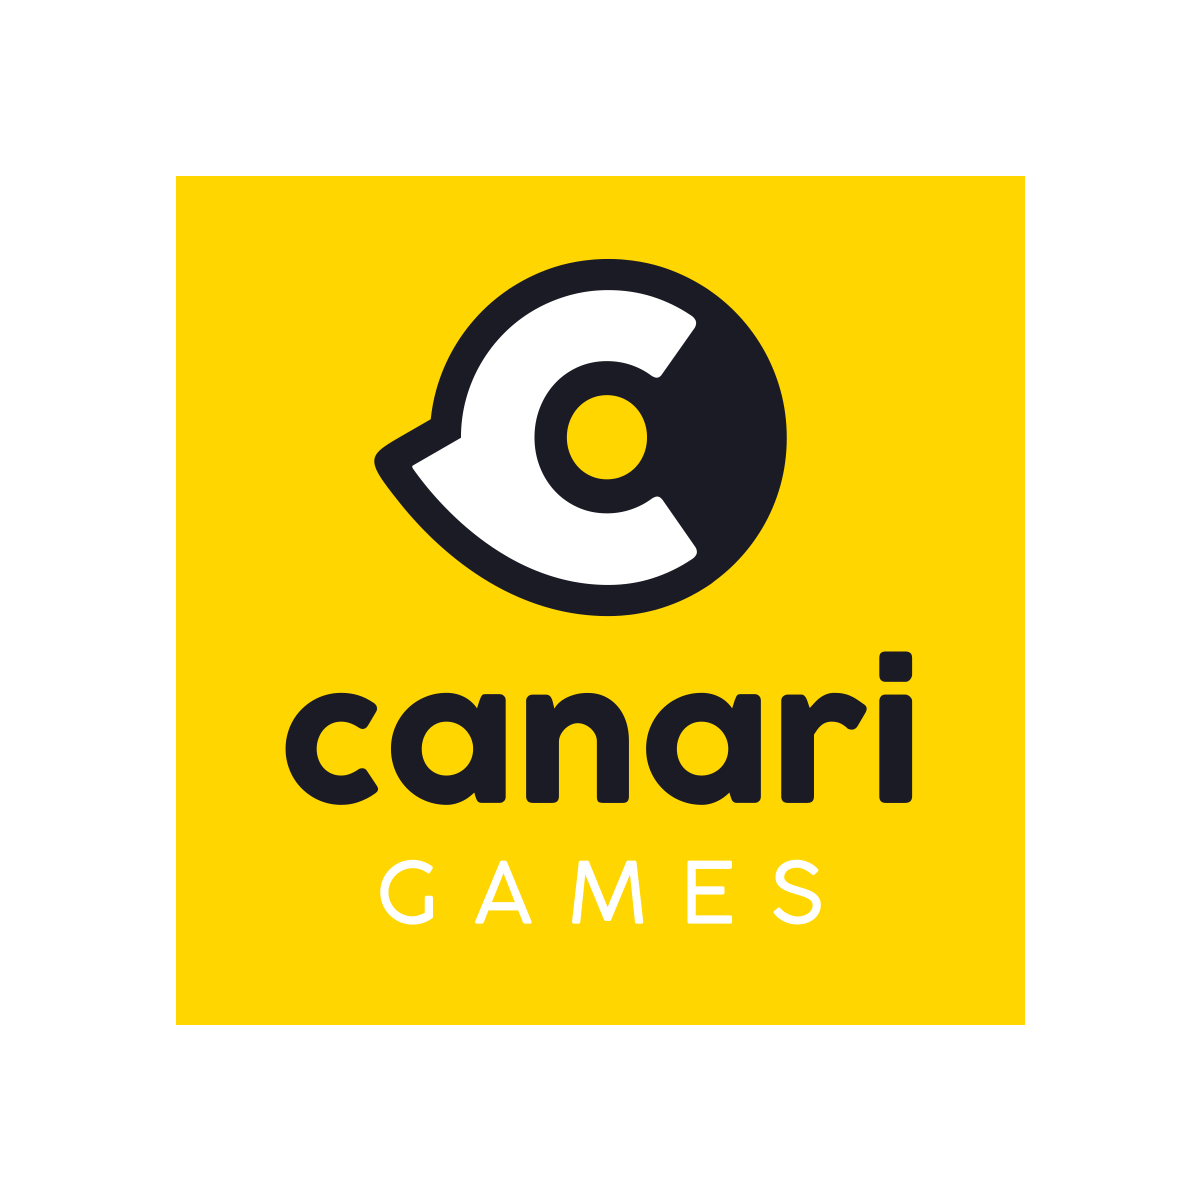 CanariGames_Square_onYellow.png